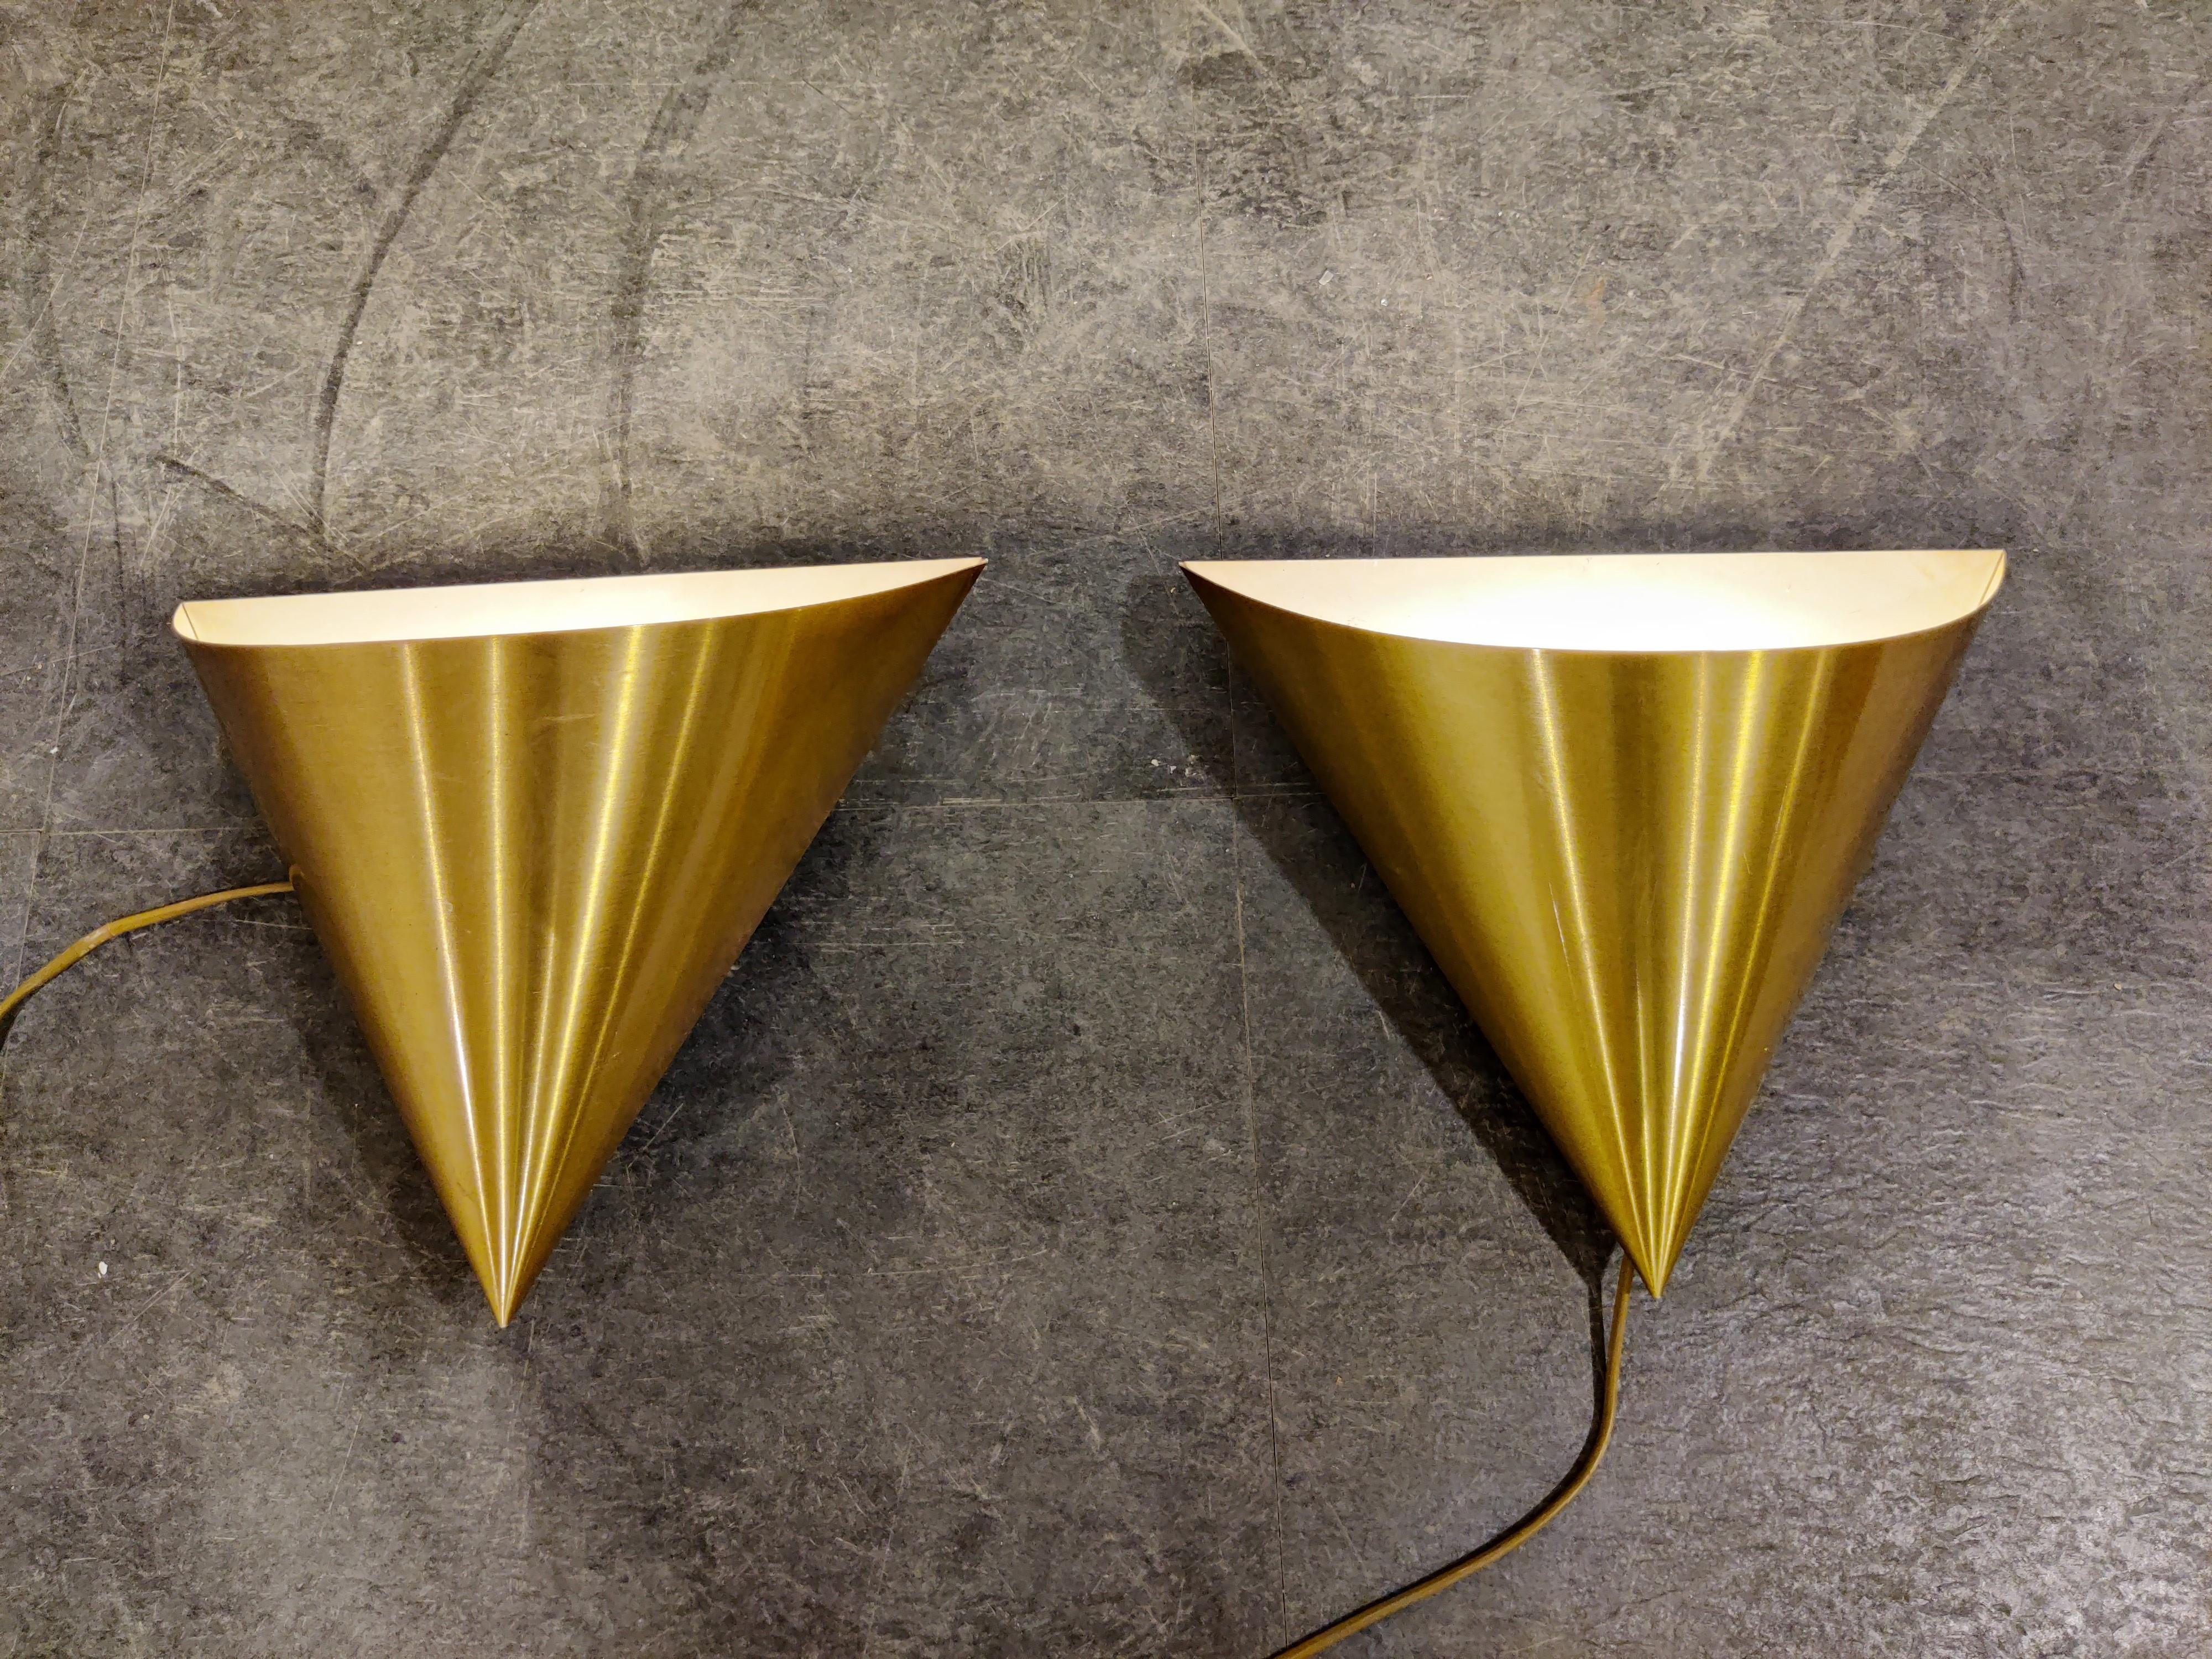 Conical brass wall lamps designed by Dieter Witte for Staff Leuchten.

They have a light enamel coating on the inside to create a soft light.

This set was salvaged from a Discotheque.

All in good condition.

A set of 6 can make a beautiful